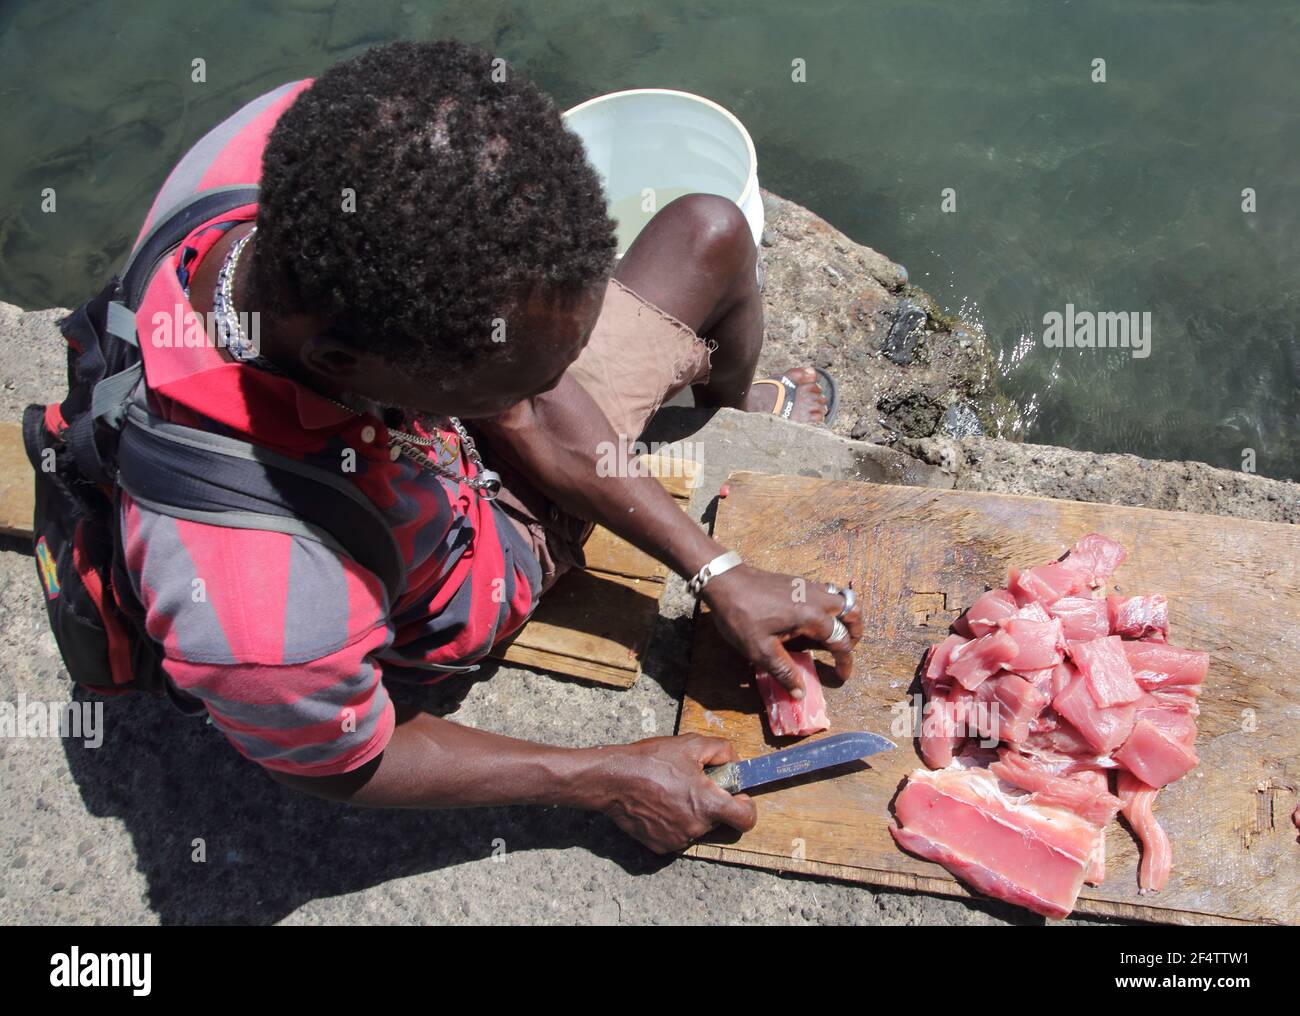 St George's Grenada The Carnage Man Cutting up Freshly Caught Fish using Knife at Water's Edge Stock Photo